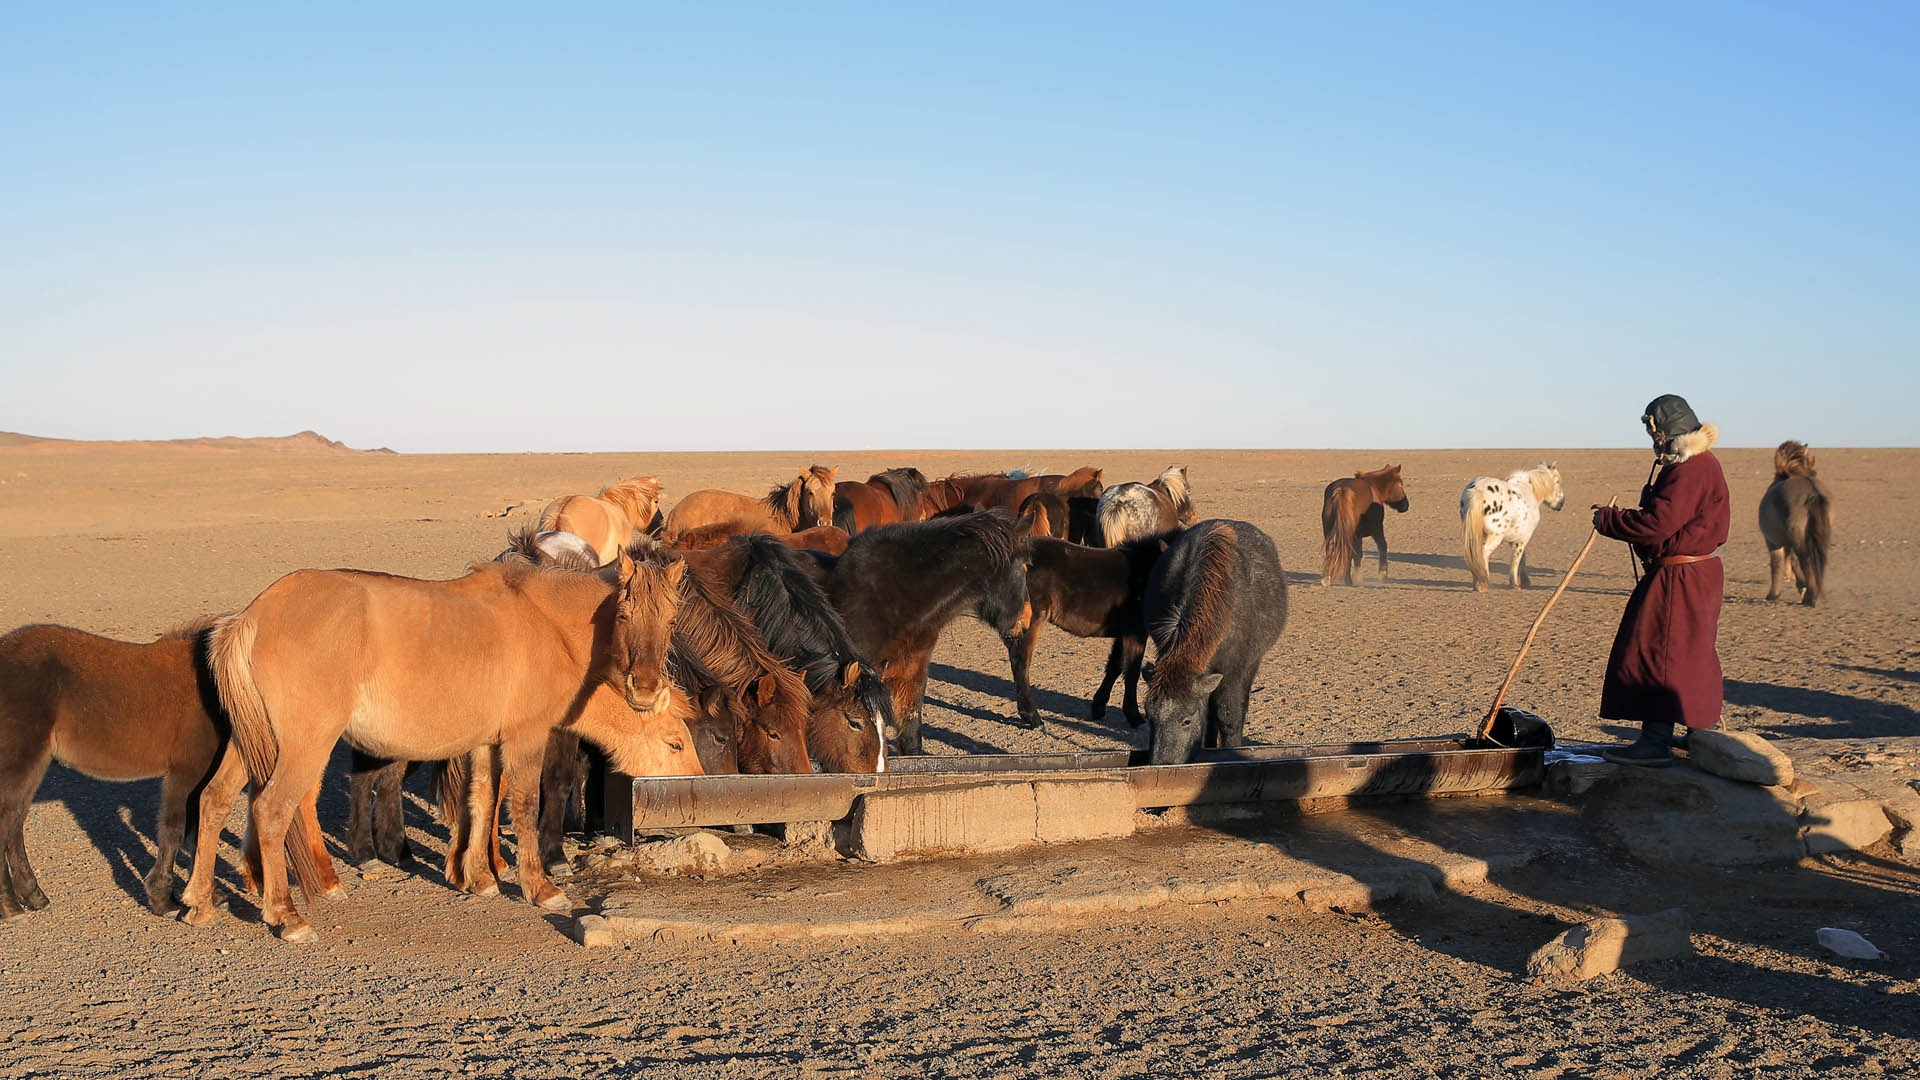 Herders rely on shallow groundwater springs and wells for their animals